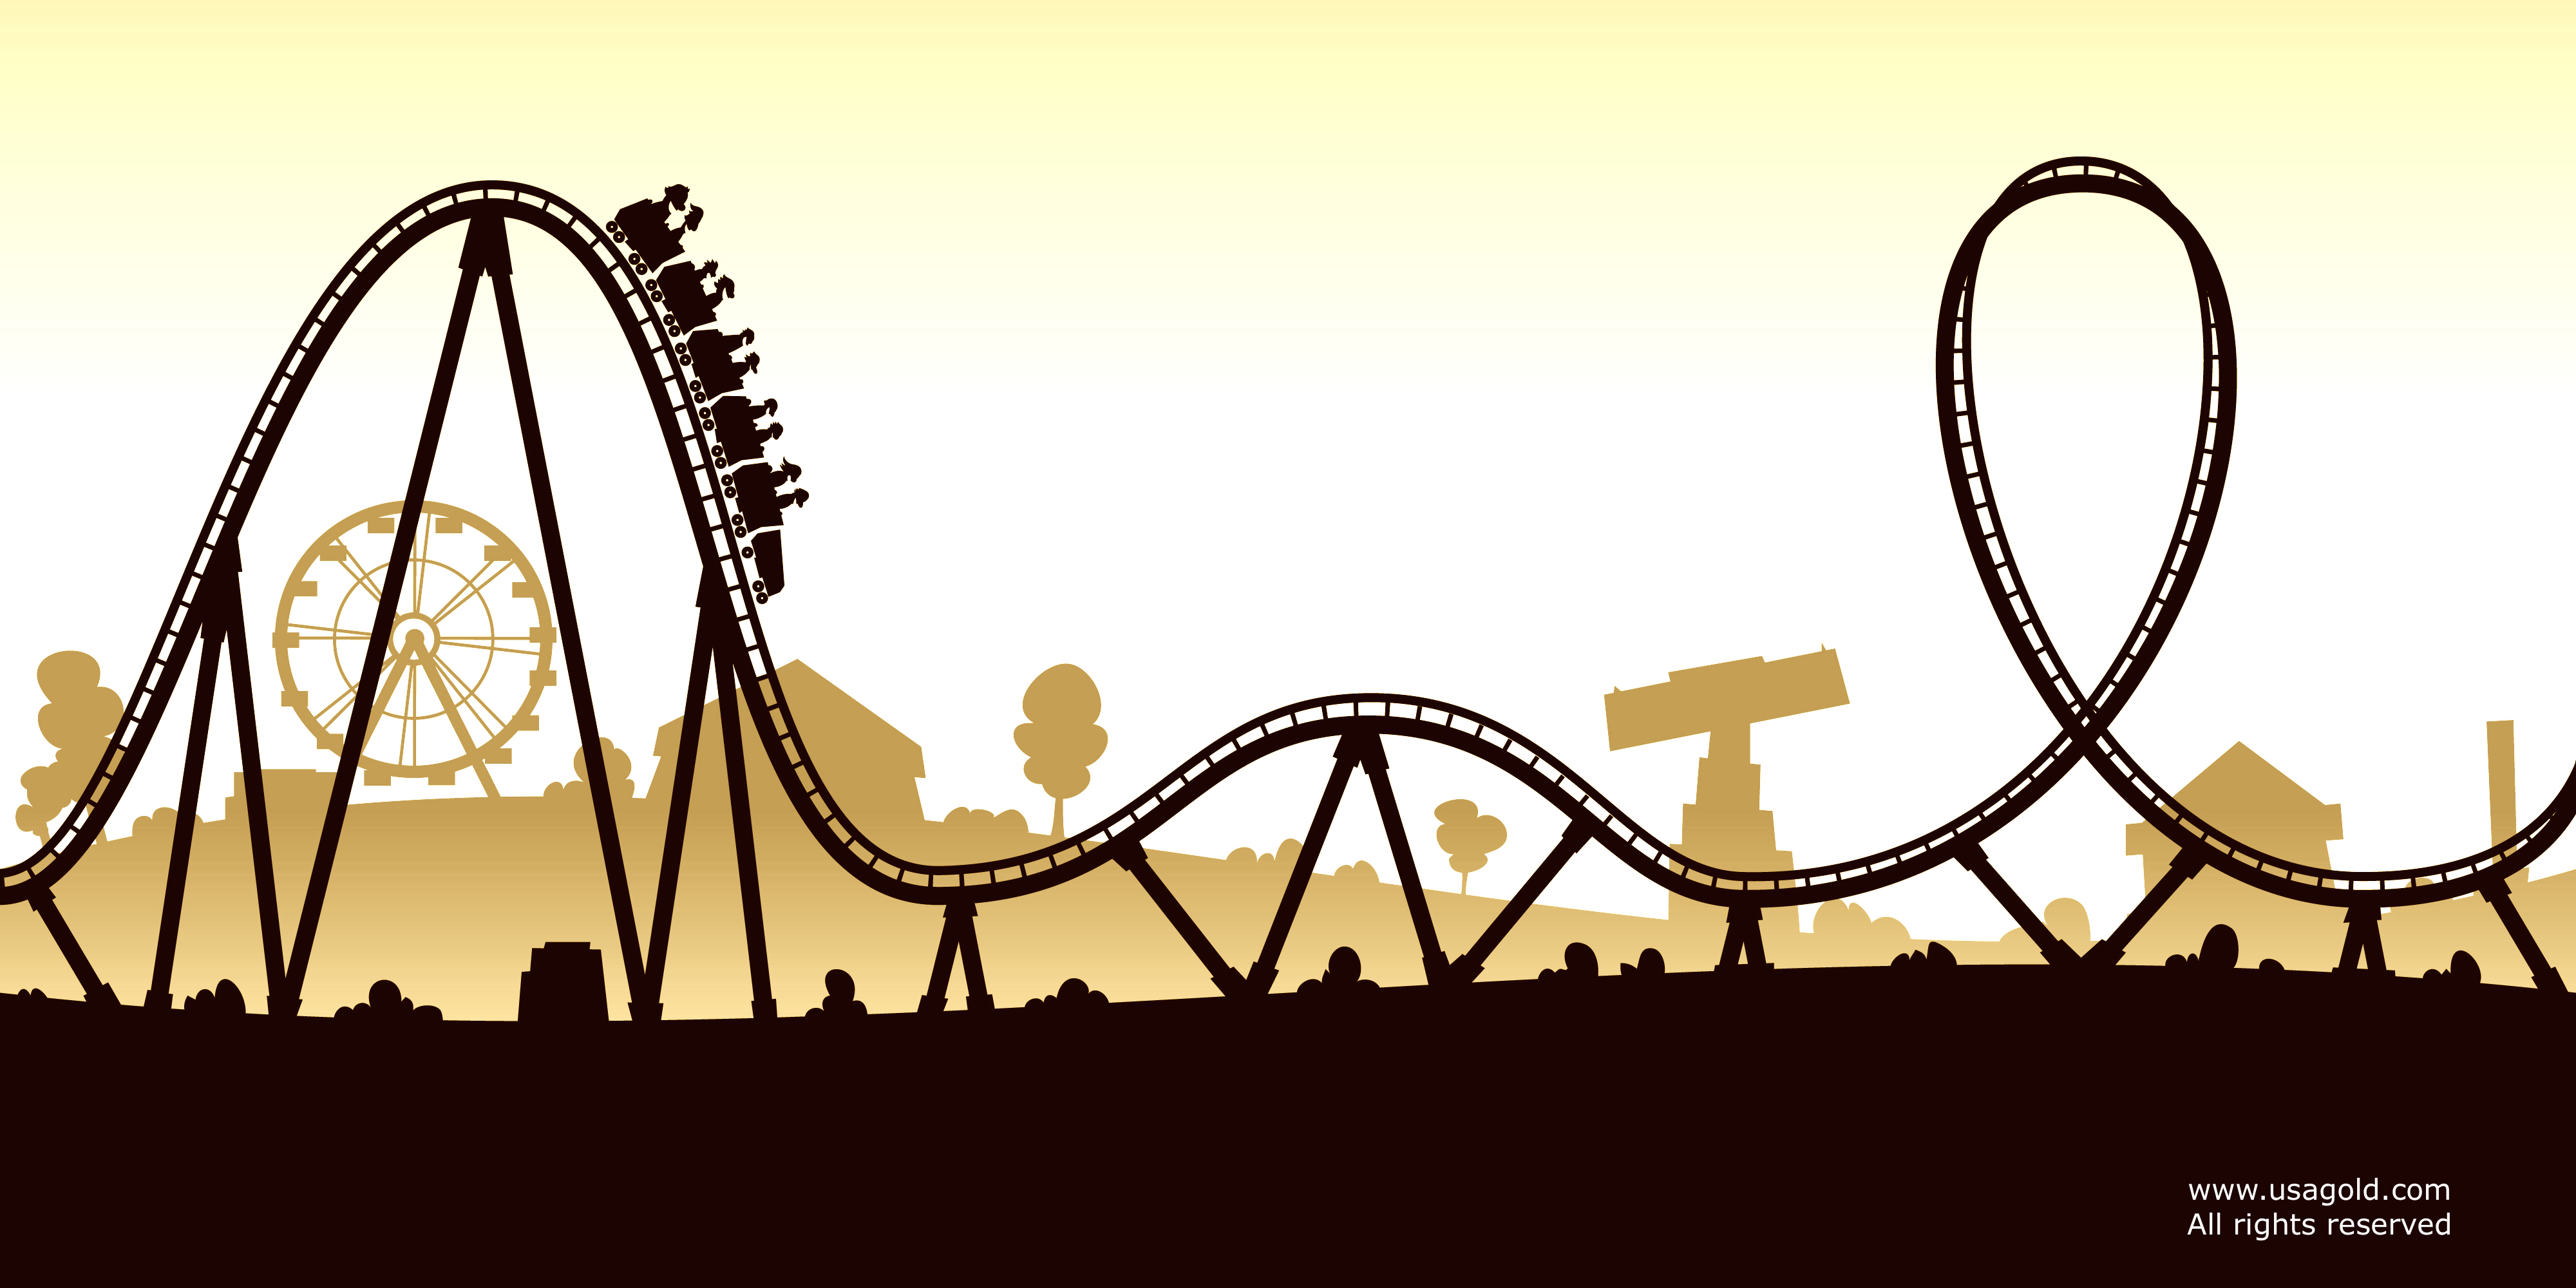 graphic image of roller coaster headed for a scary ride